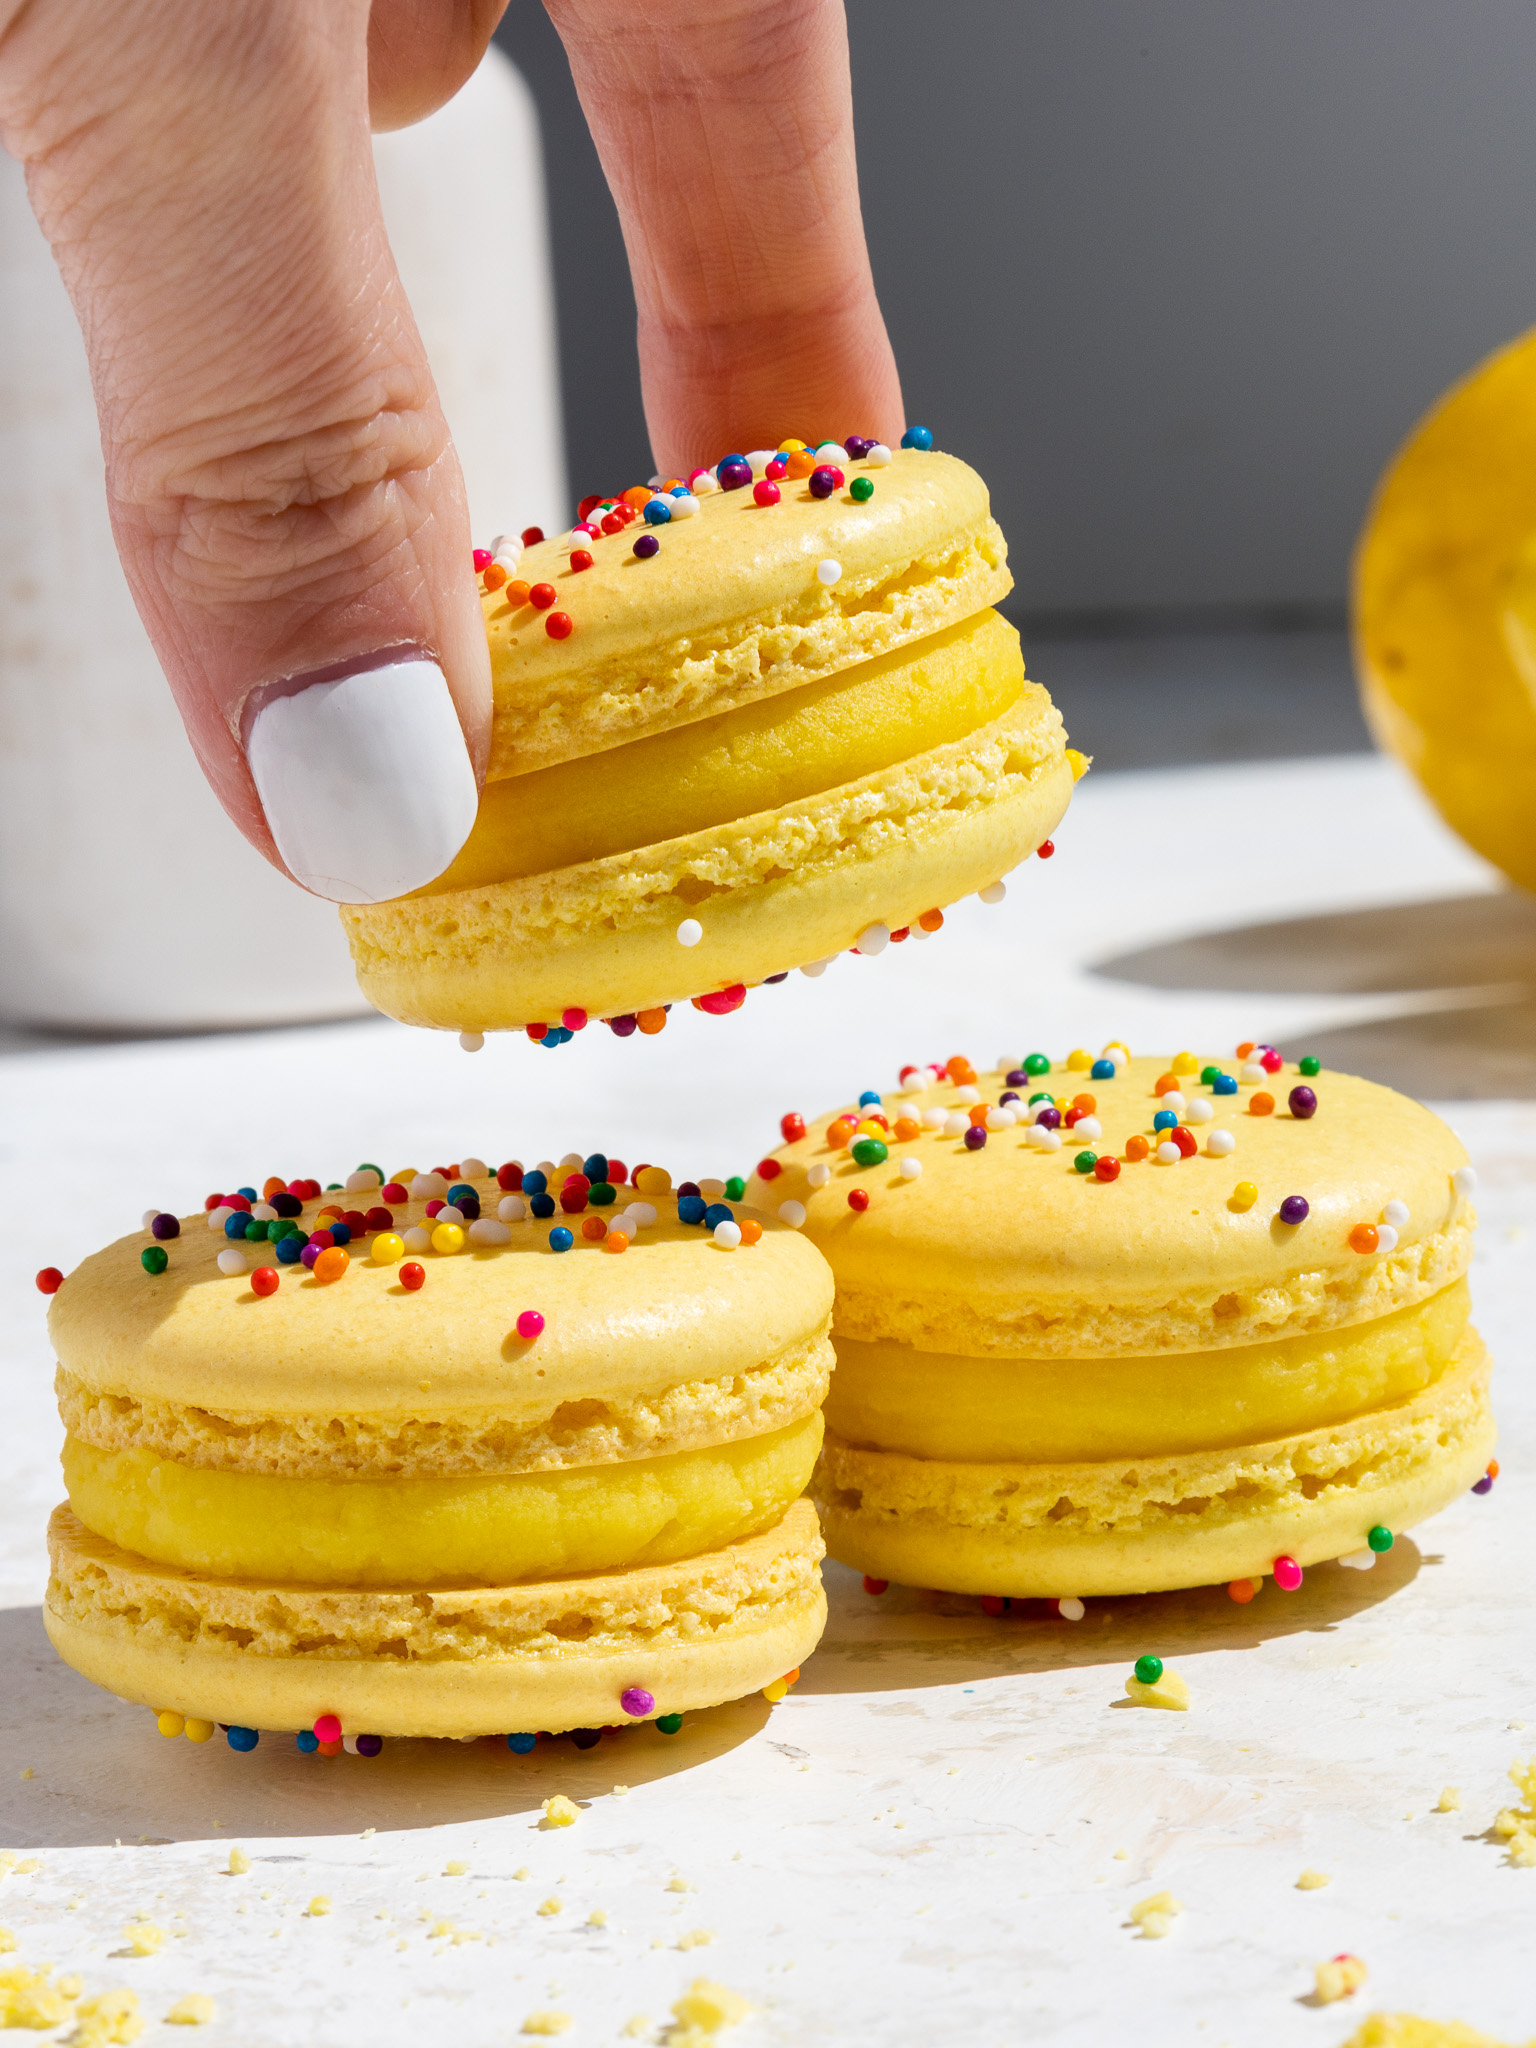 image of macarons filled with lemon ganache being stacked on top of each other